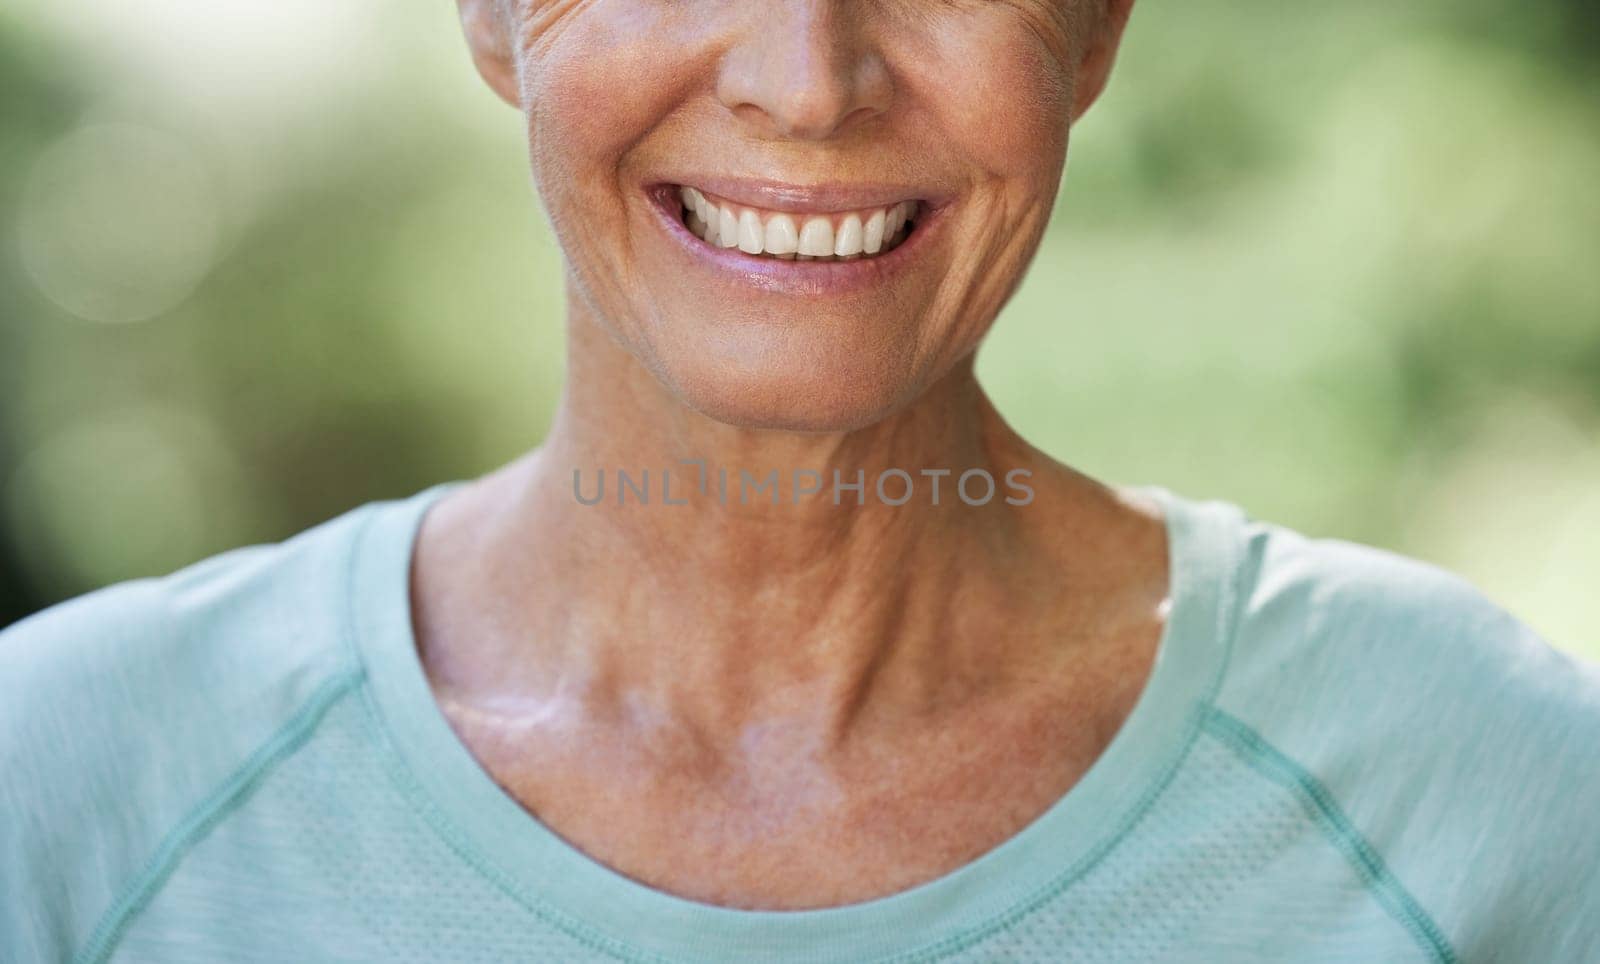 Smile, teeth and closeup with a senior woman outdoor in nature feeling happy, positive or carefree. Mouth, cheerful and dental with a mature female smiling happily outside in a garden during summer.